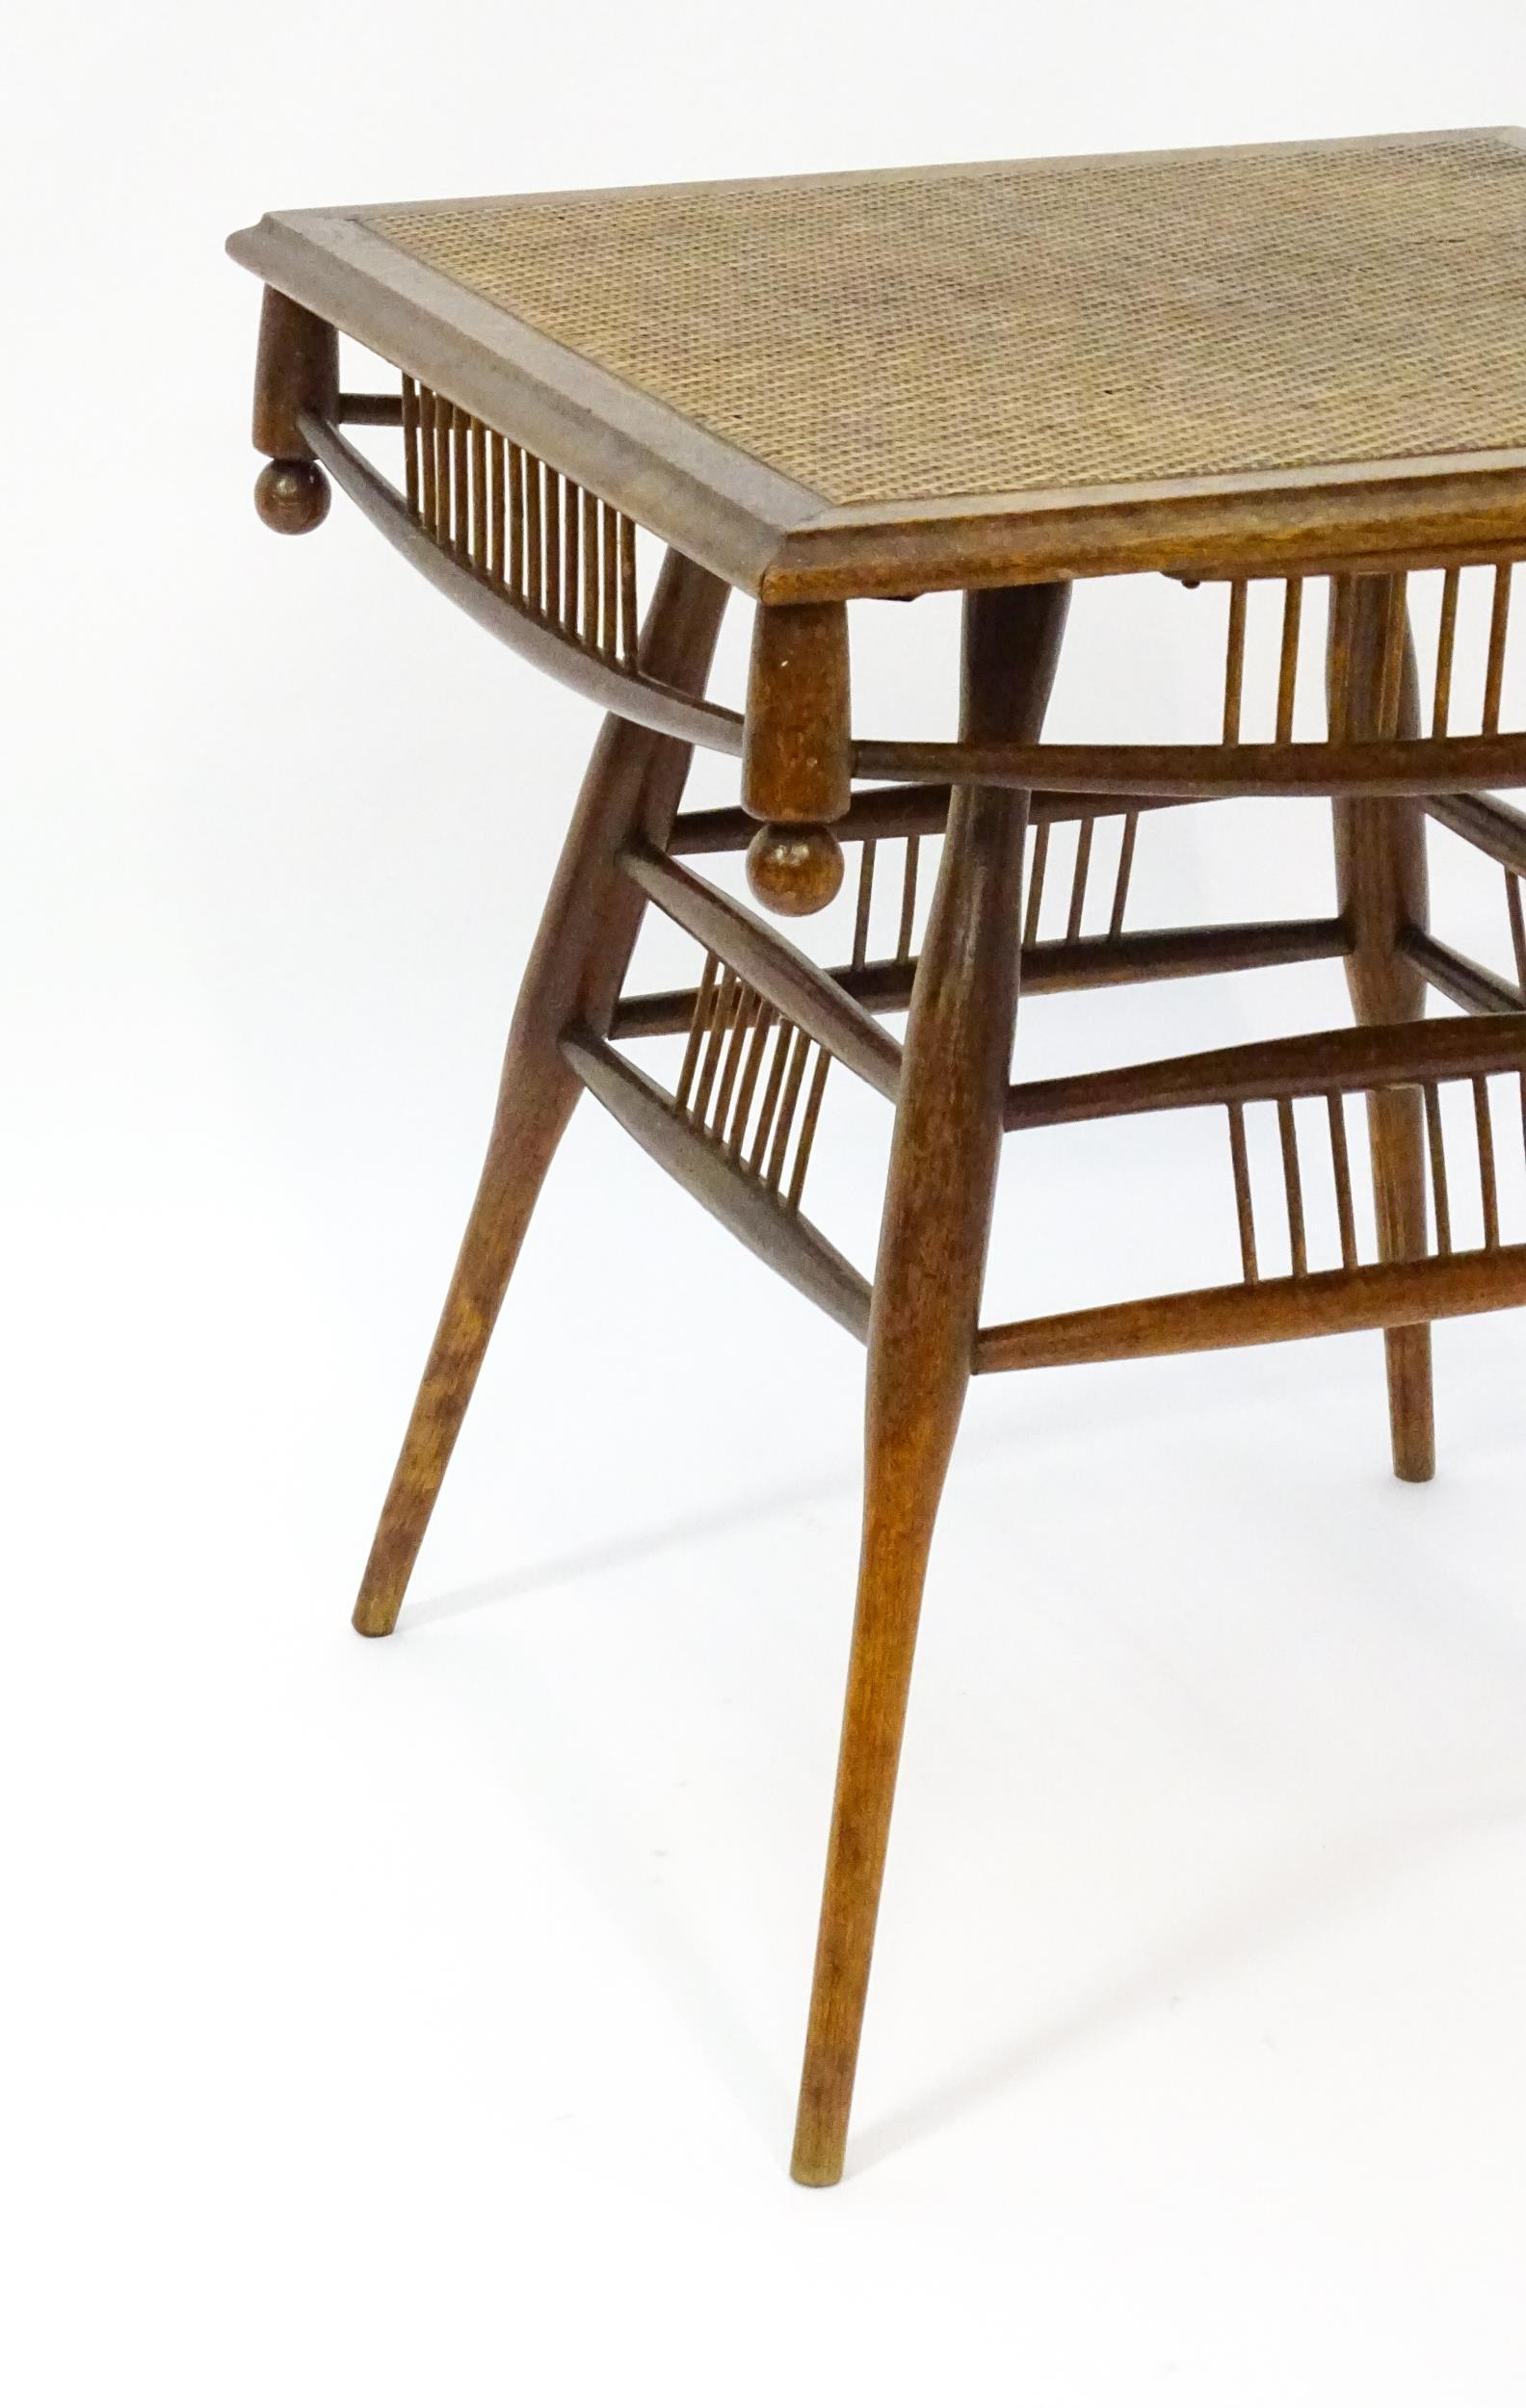 An unusual late 19thC Arts & Crafts table with a rattan inlaid moulded top above three tiers of - Image 9 of 10